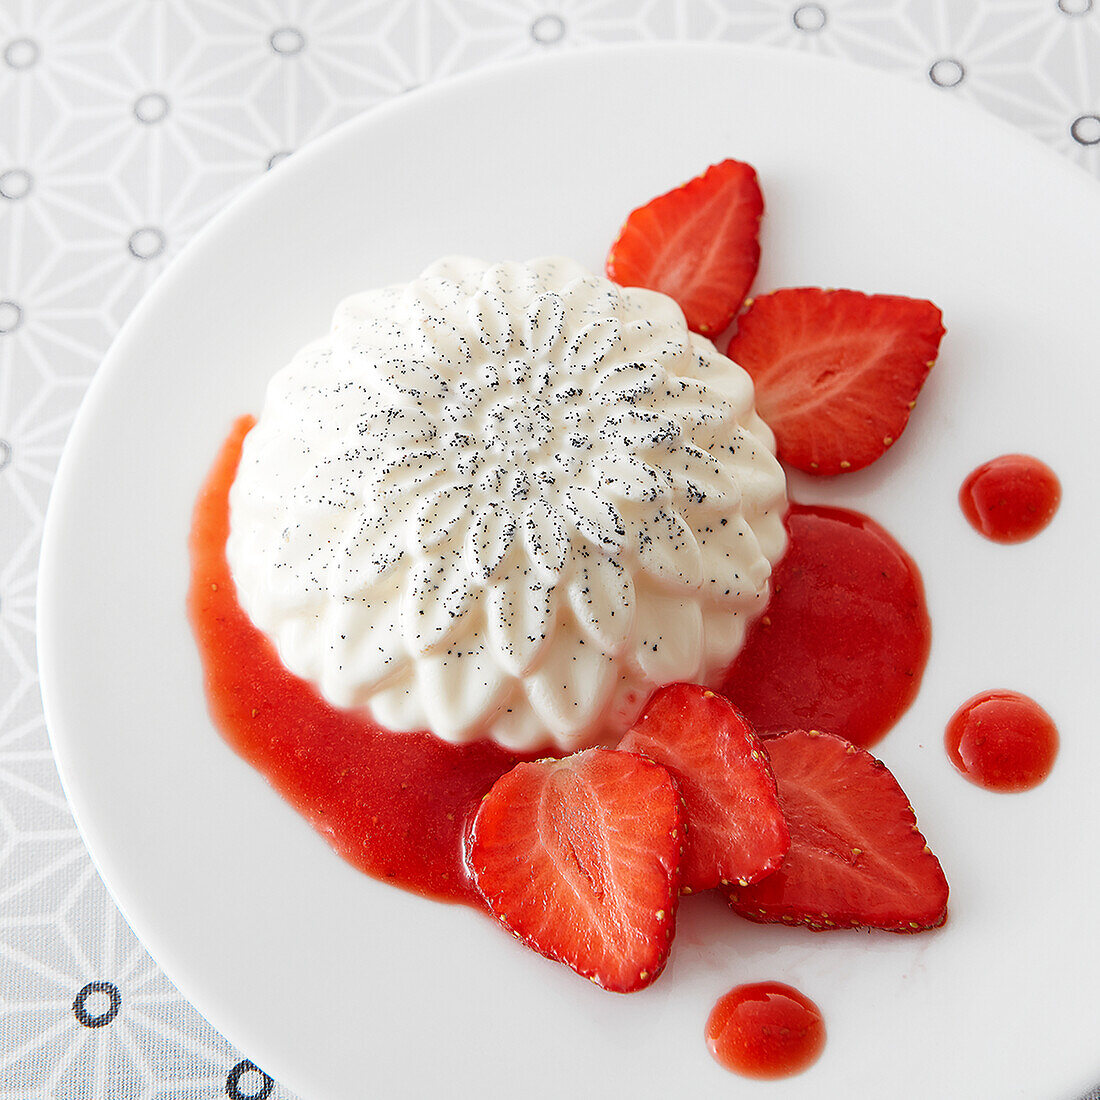 Panna cotta dome with strawberry coulis